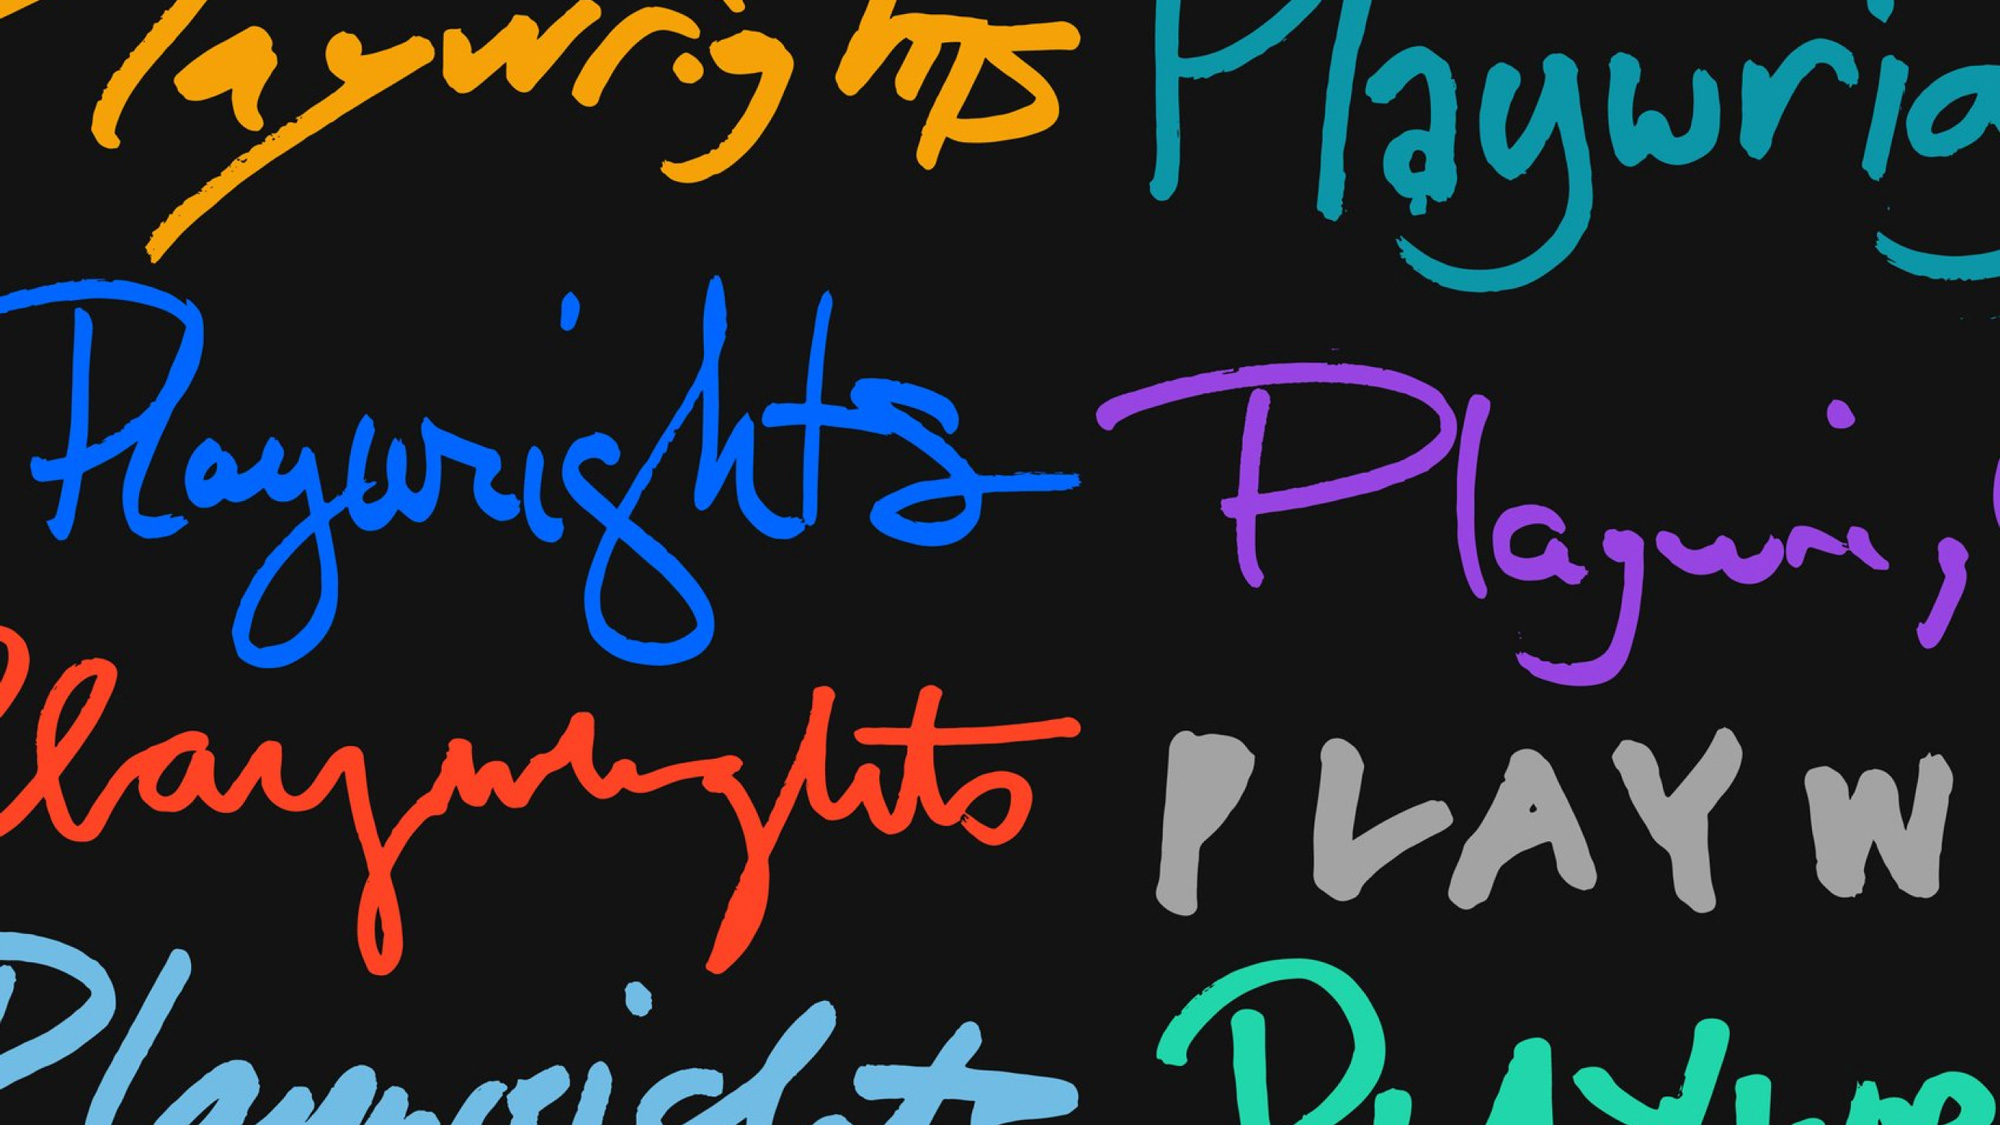 Playwrights written in various colors and type styles